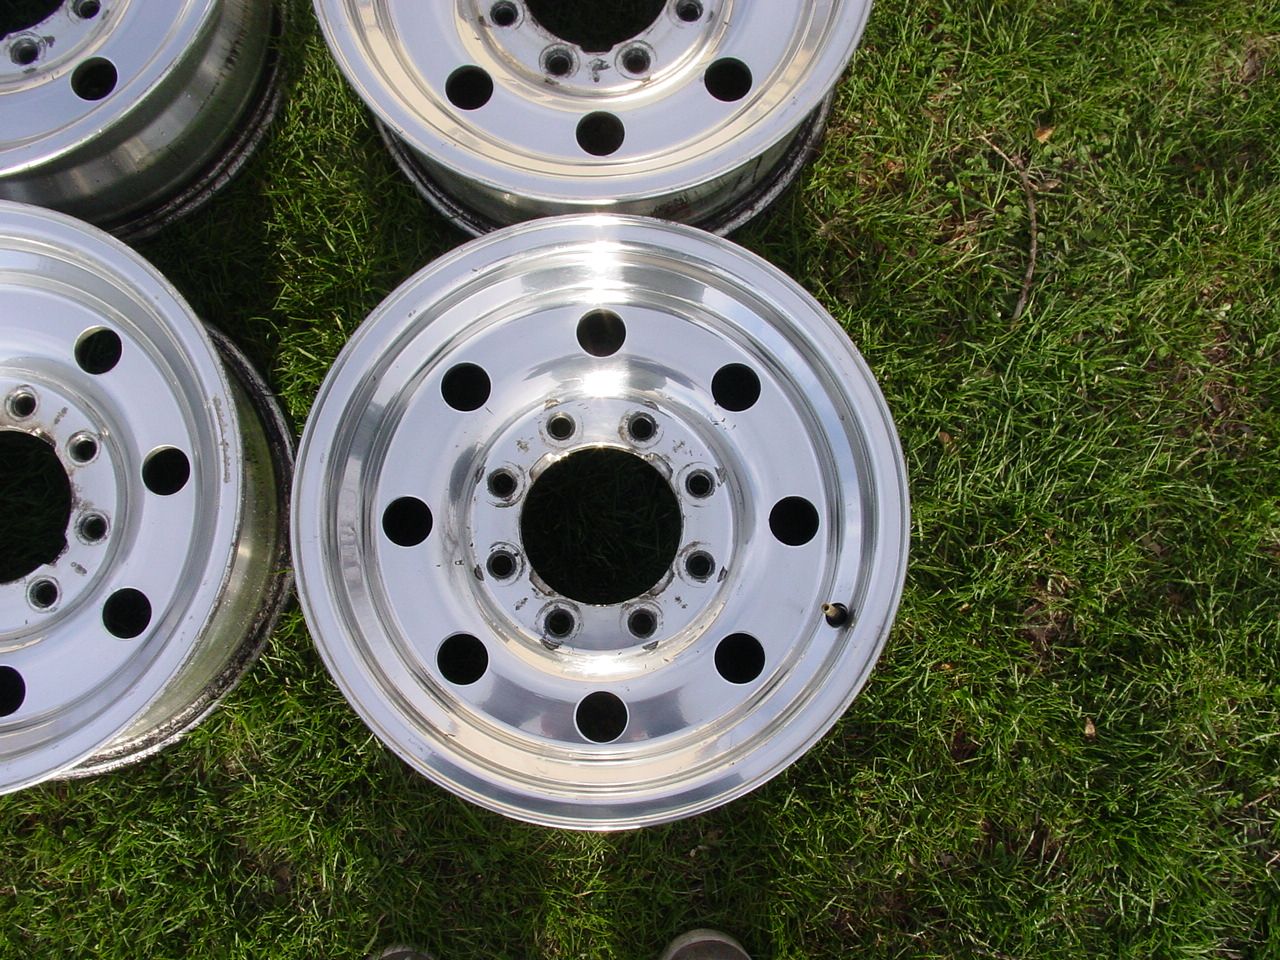 Original factory ford wheels in all original condition, show signs of